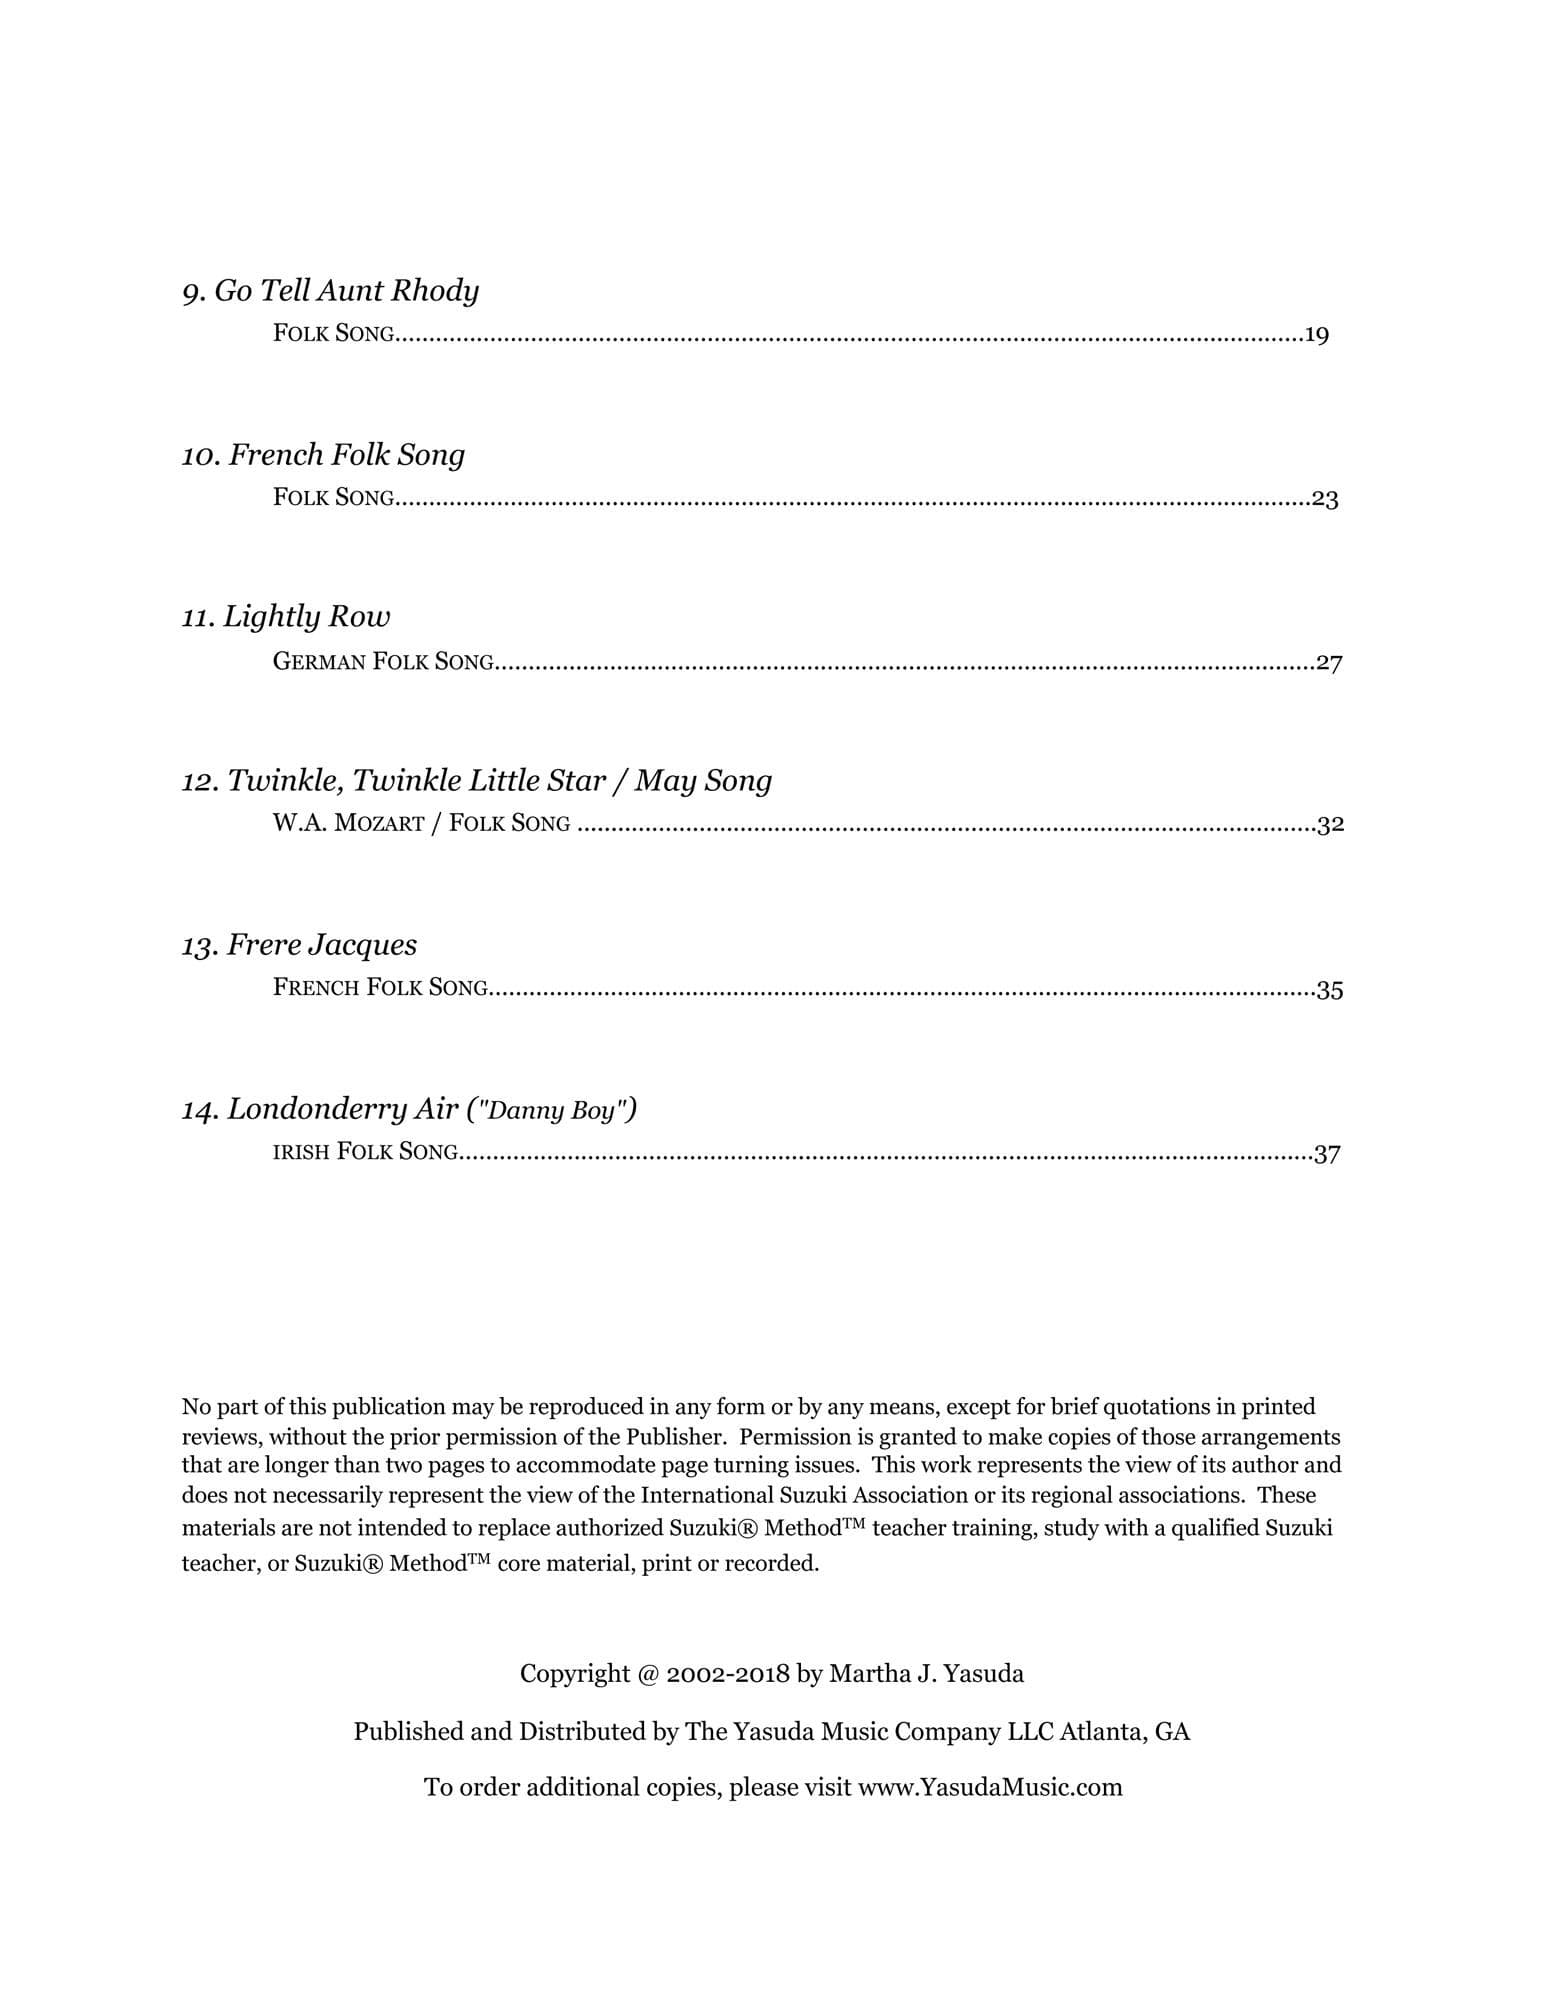 Yasuda - Contemporary & Classical Arr. for Violin Ensemble (with Accomp) - Dig. Download